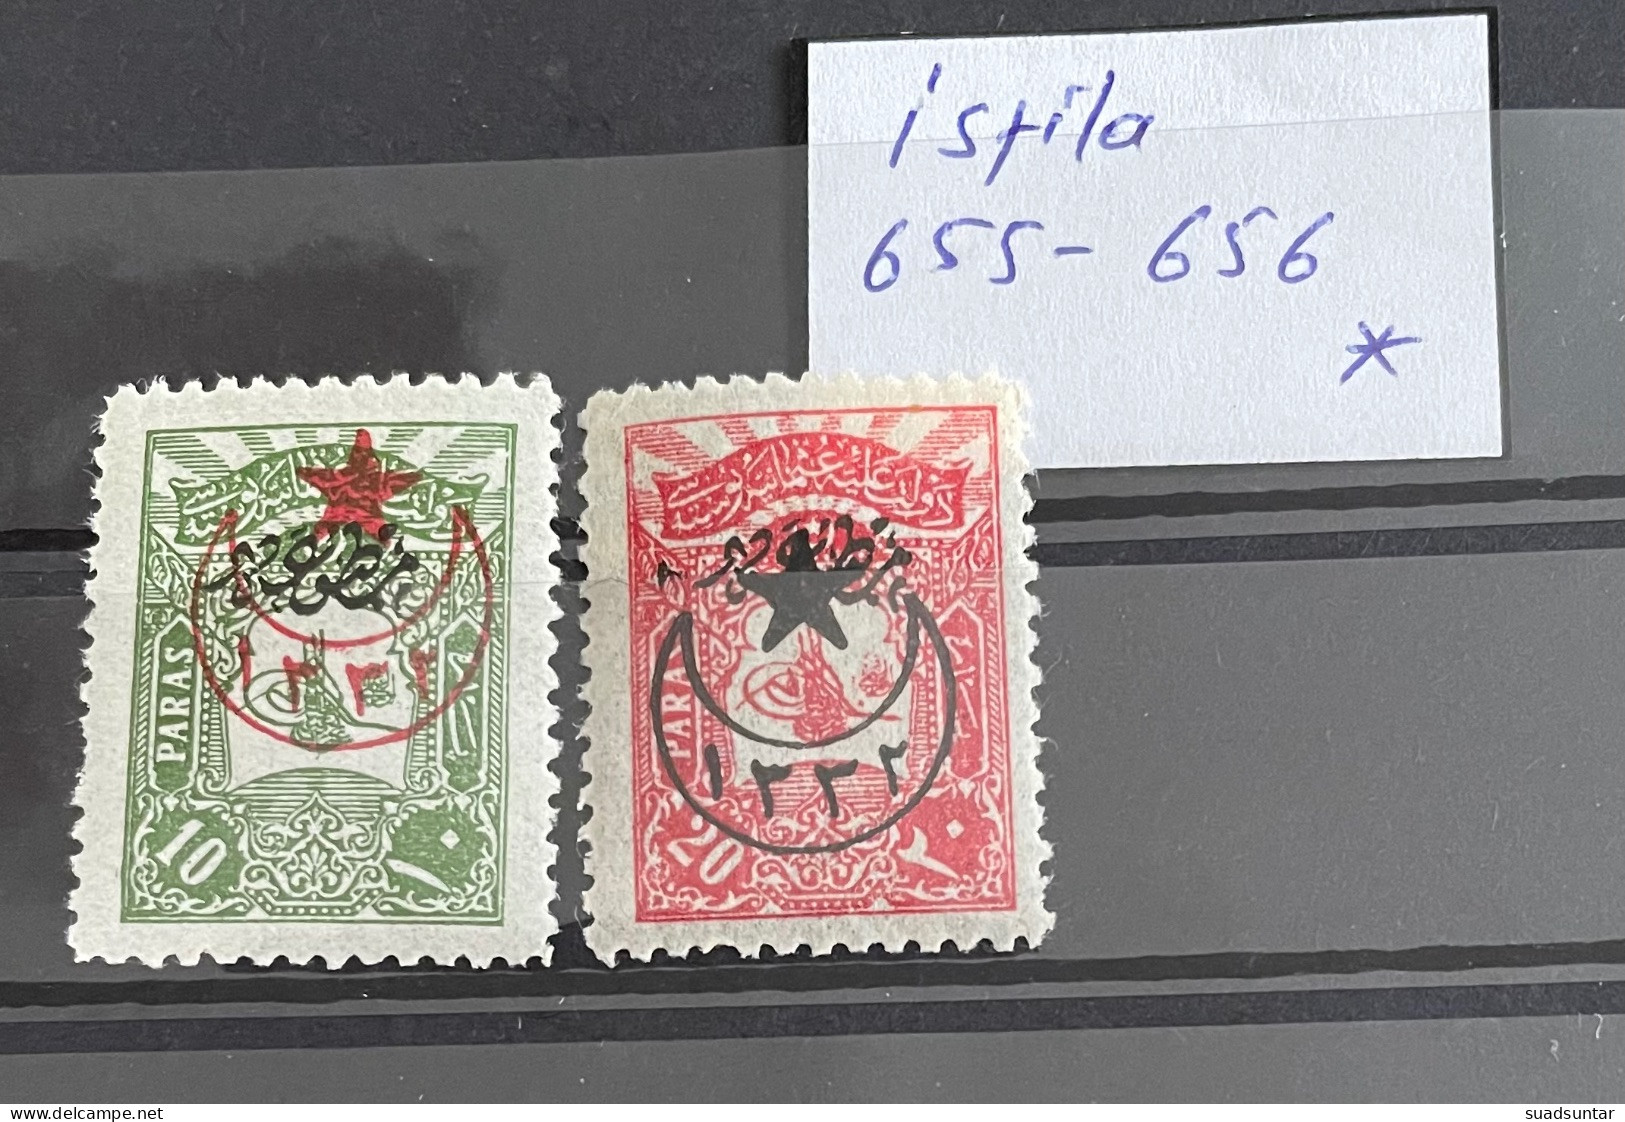 1916 5 Star Overprinted Stamps MH Isfila 655-656 High Values - Nuovi